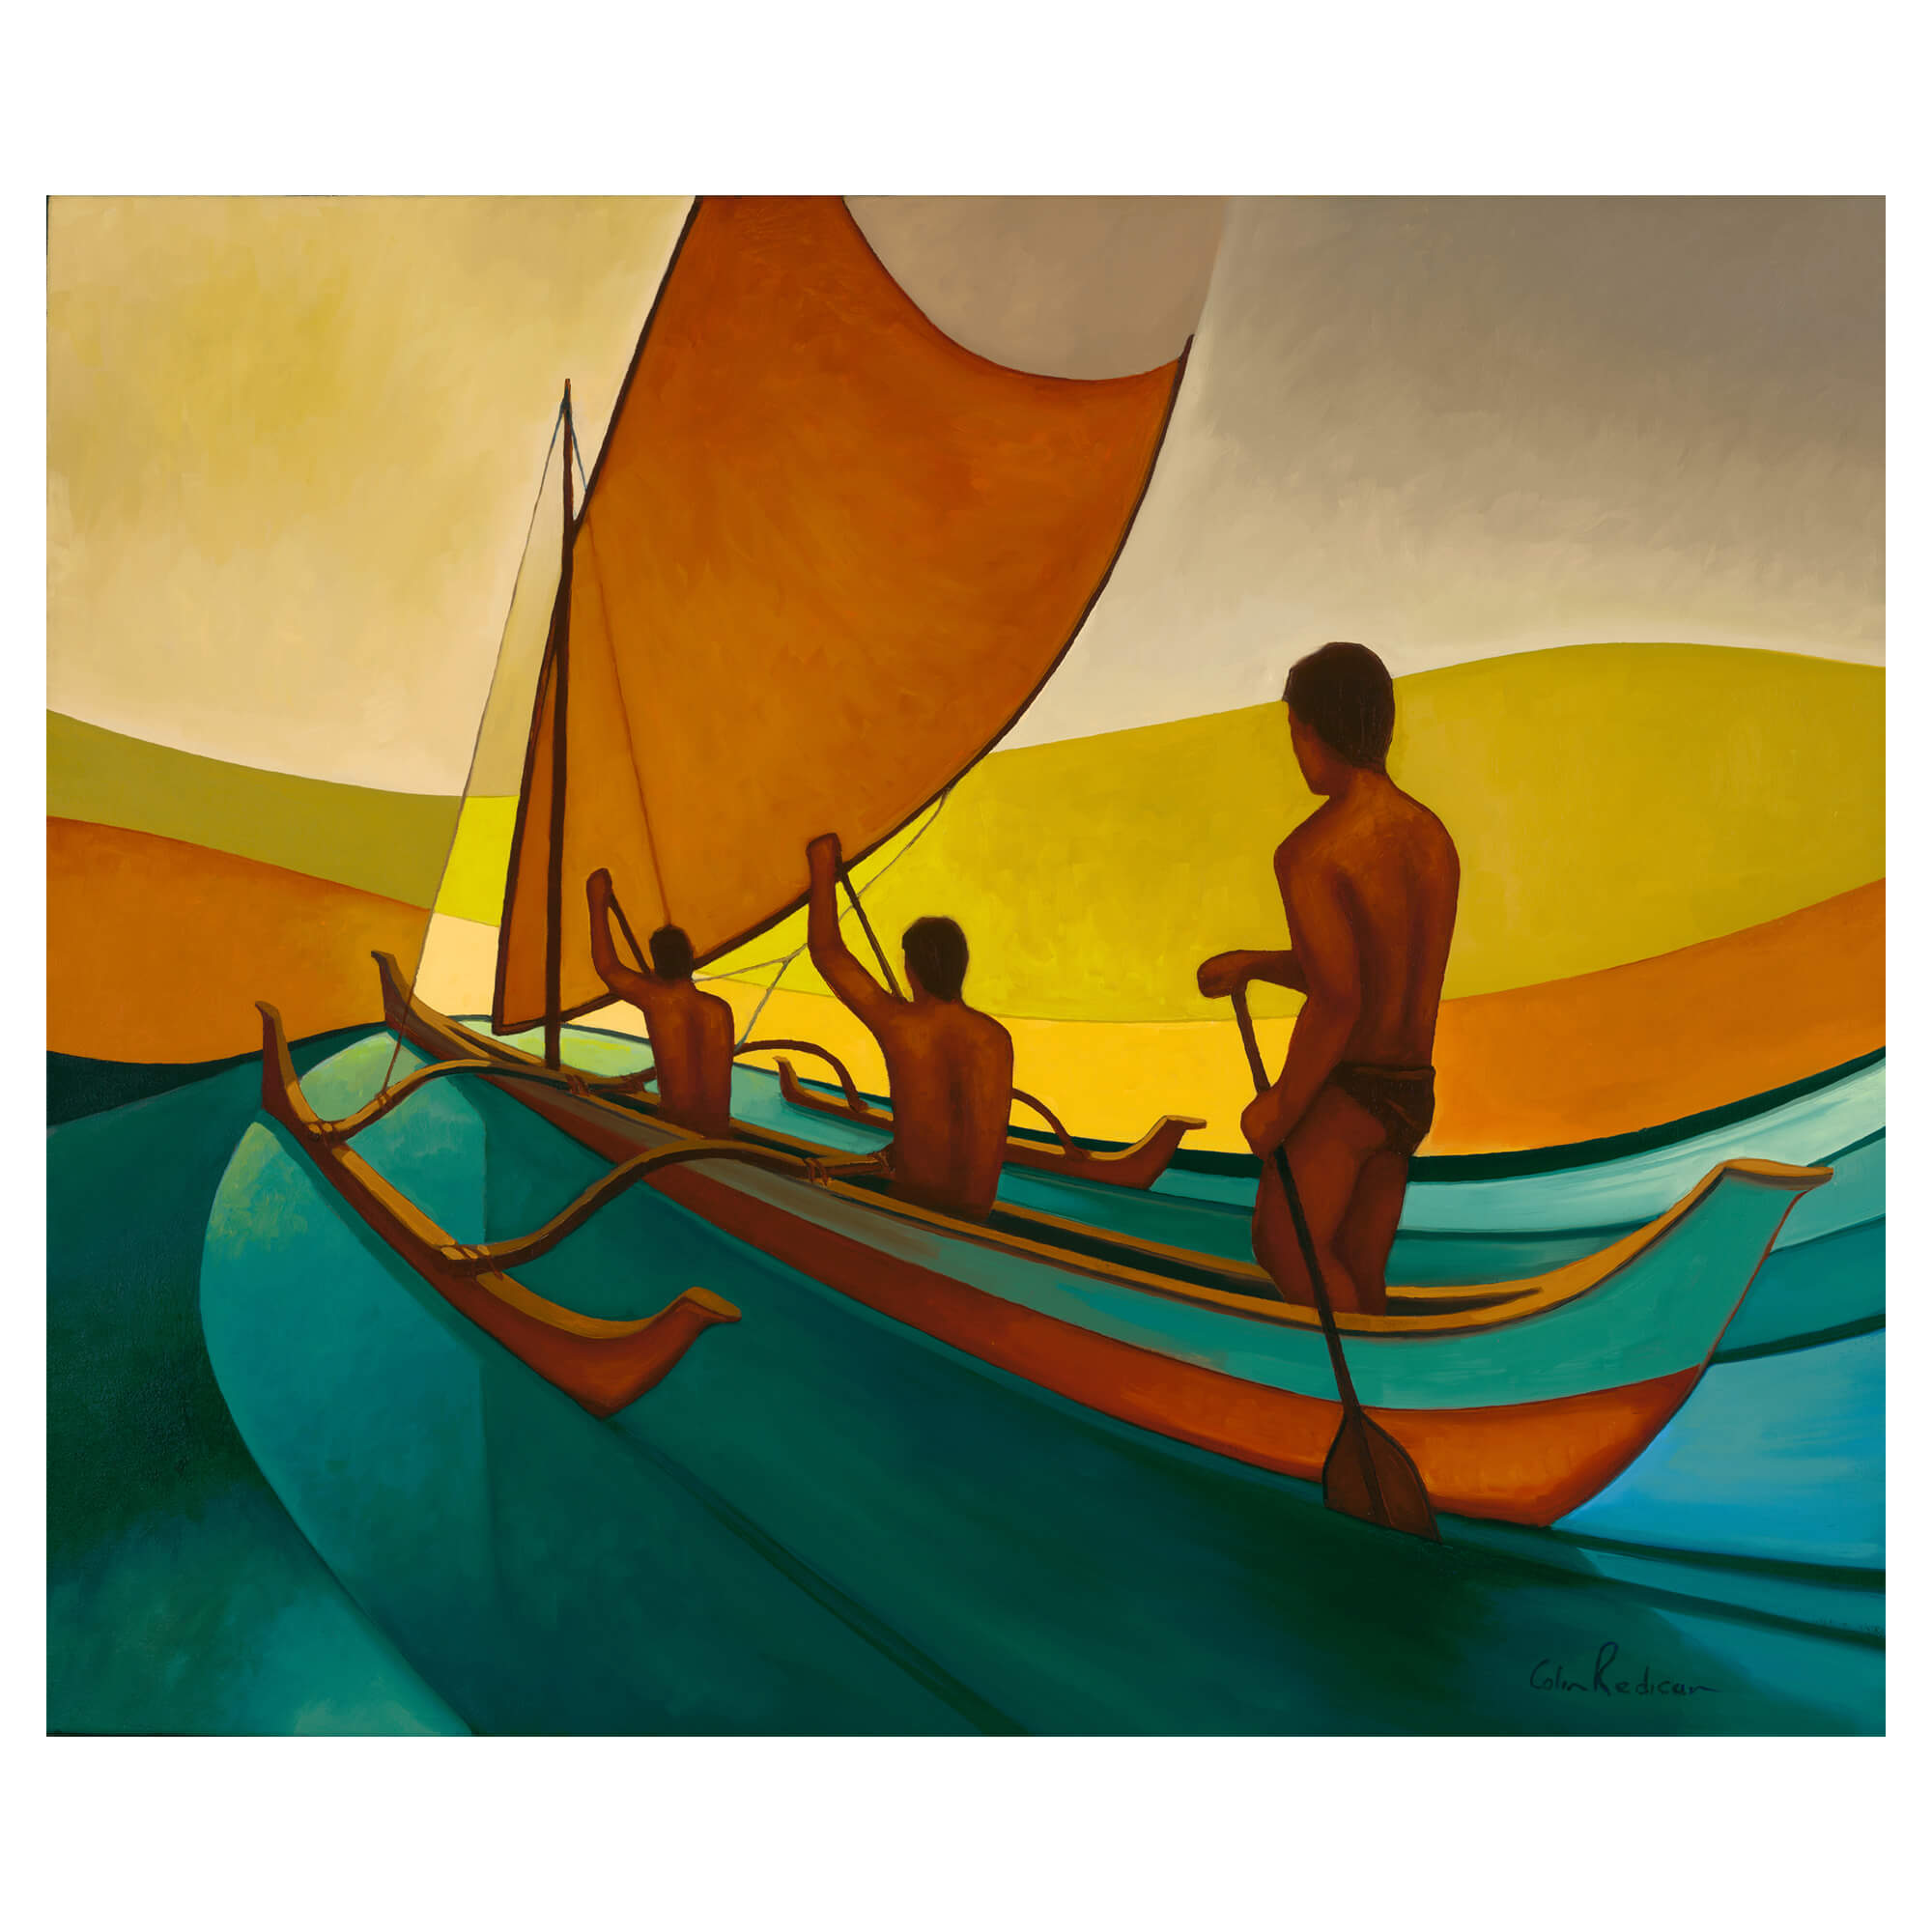 Men in a canoe under a yellow hued sky by Hawaii artist Colin Redican